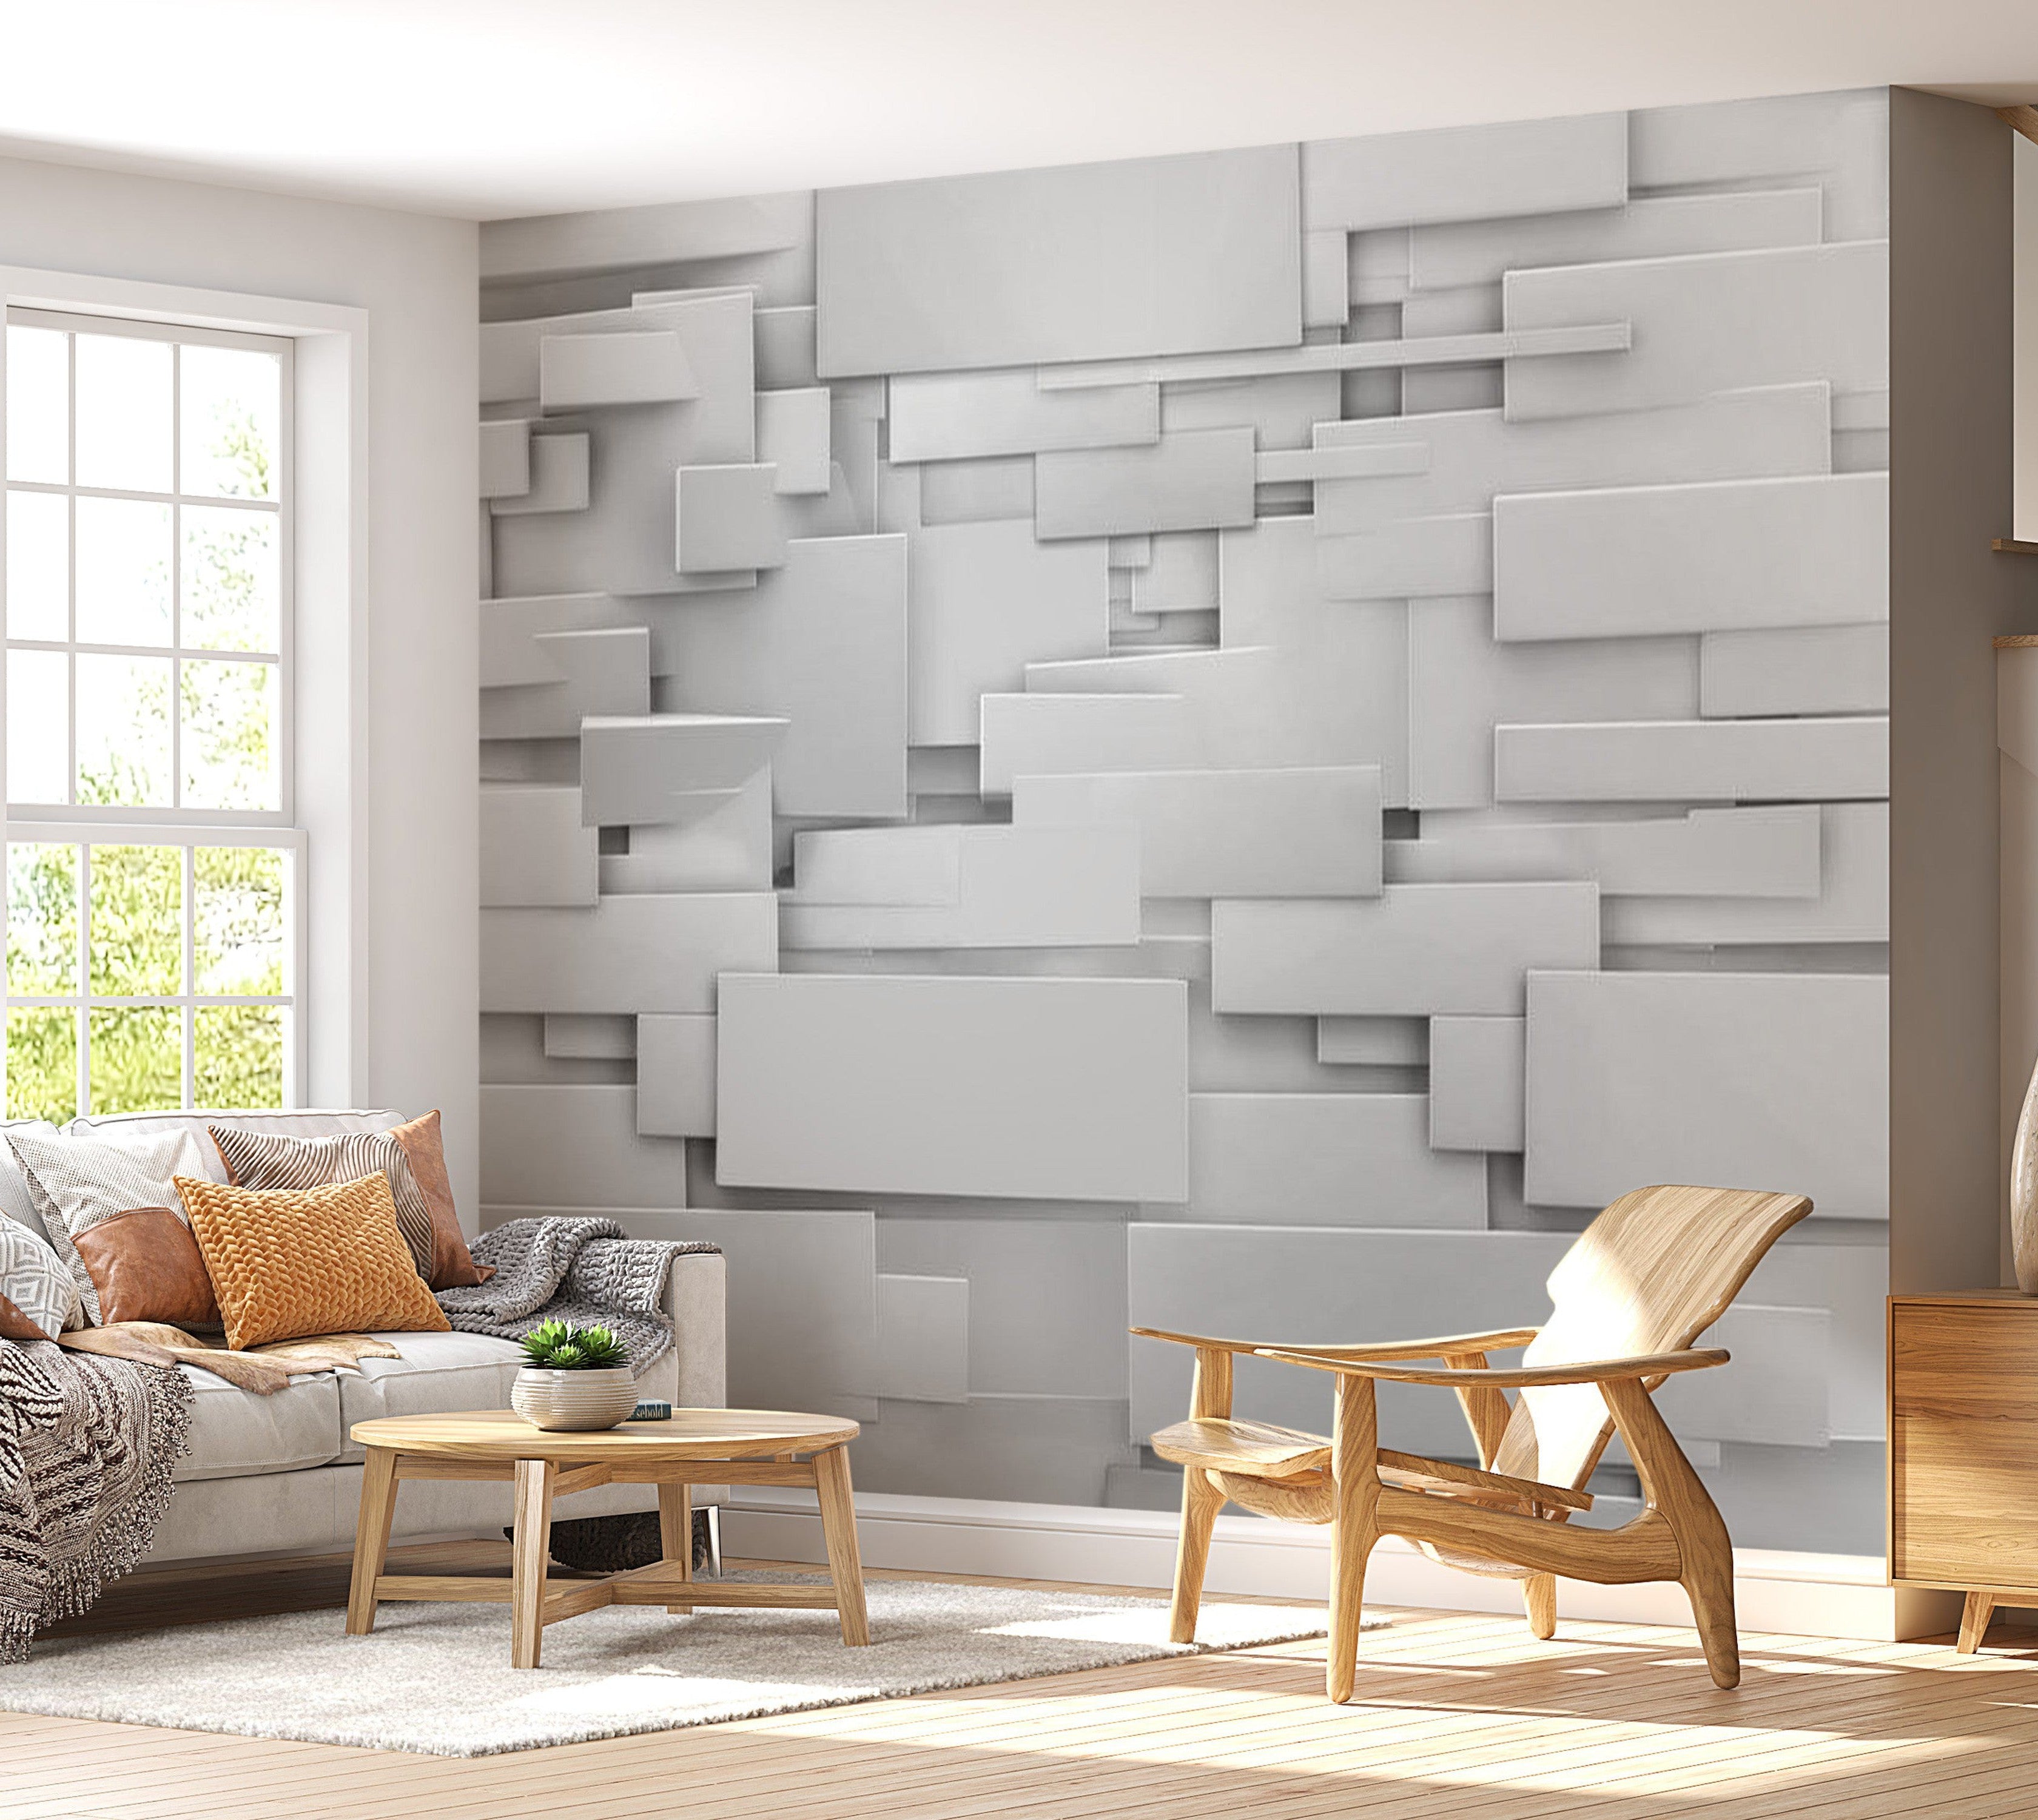 Peel & Stick Wall Mural - Abstract Grey Plates - Removable Wall Decals